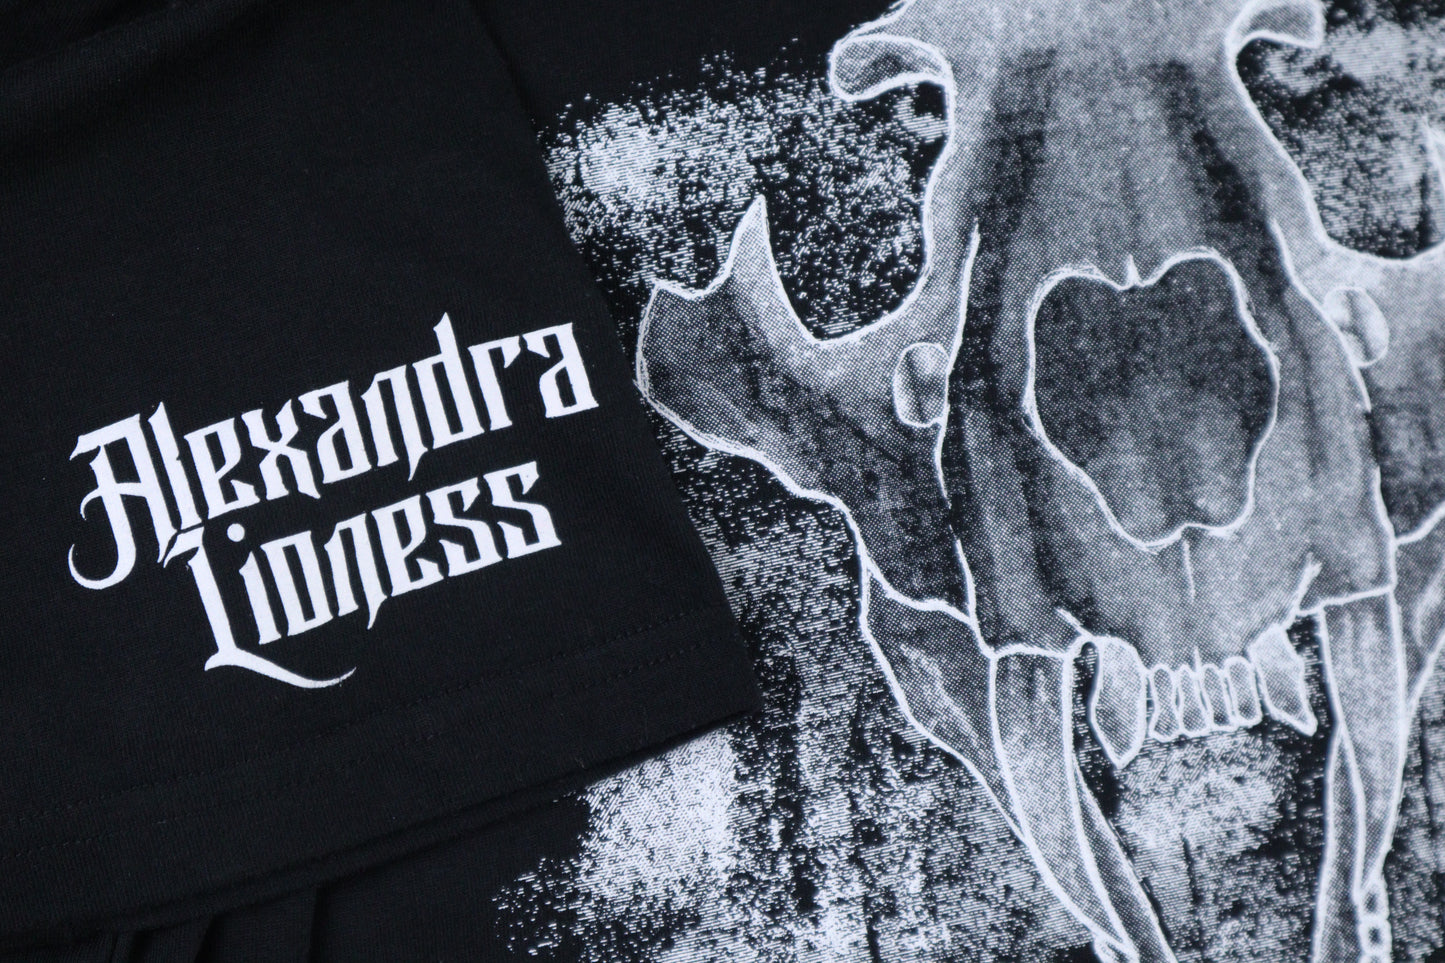 Undead Lioness Classic Tee